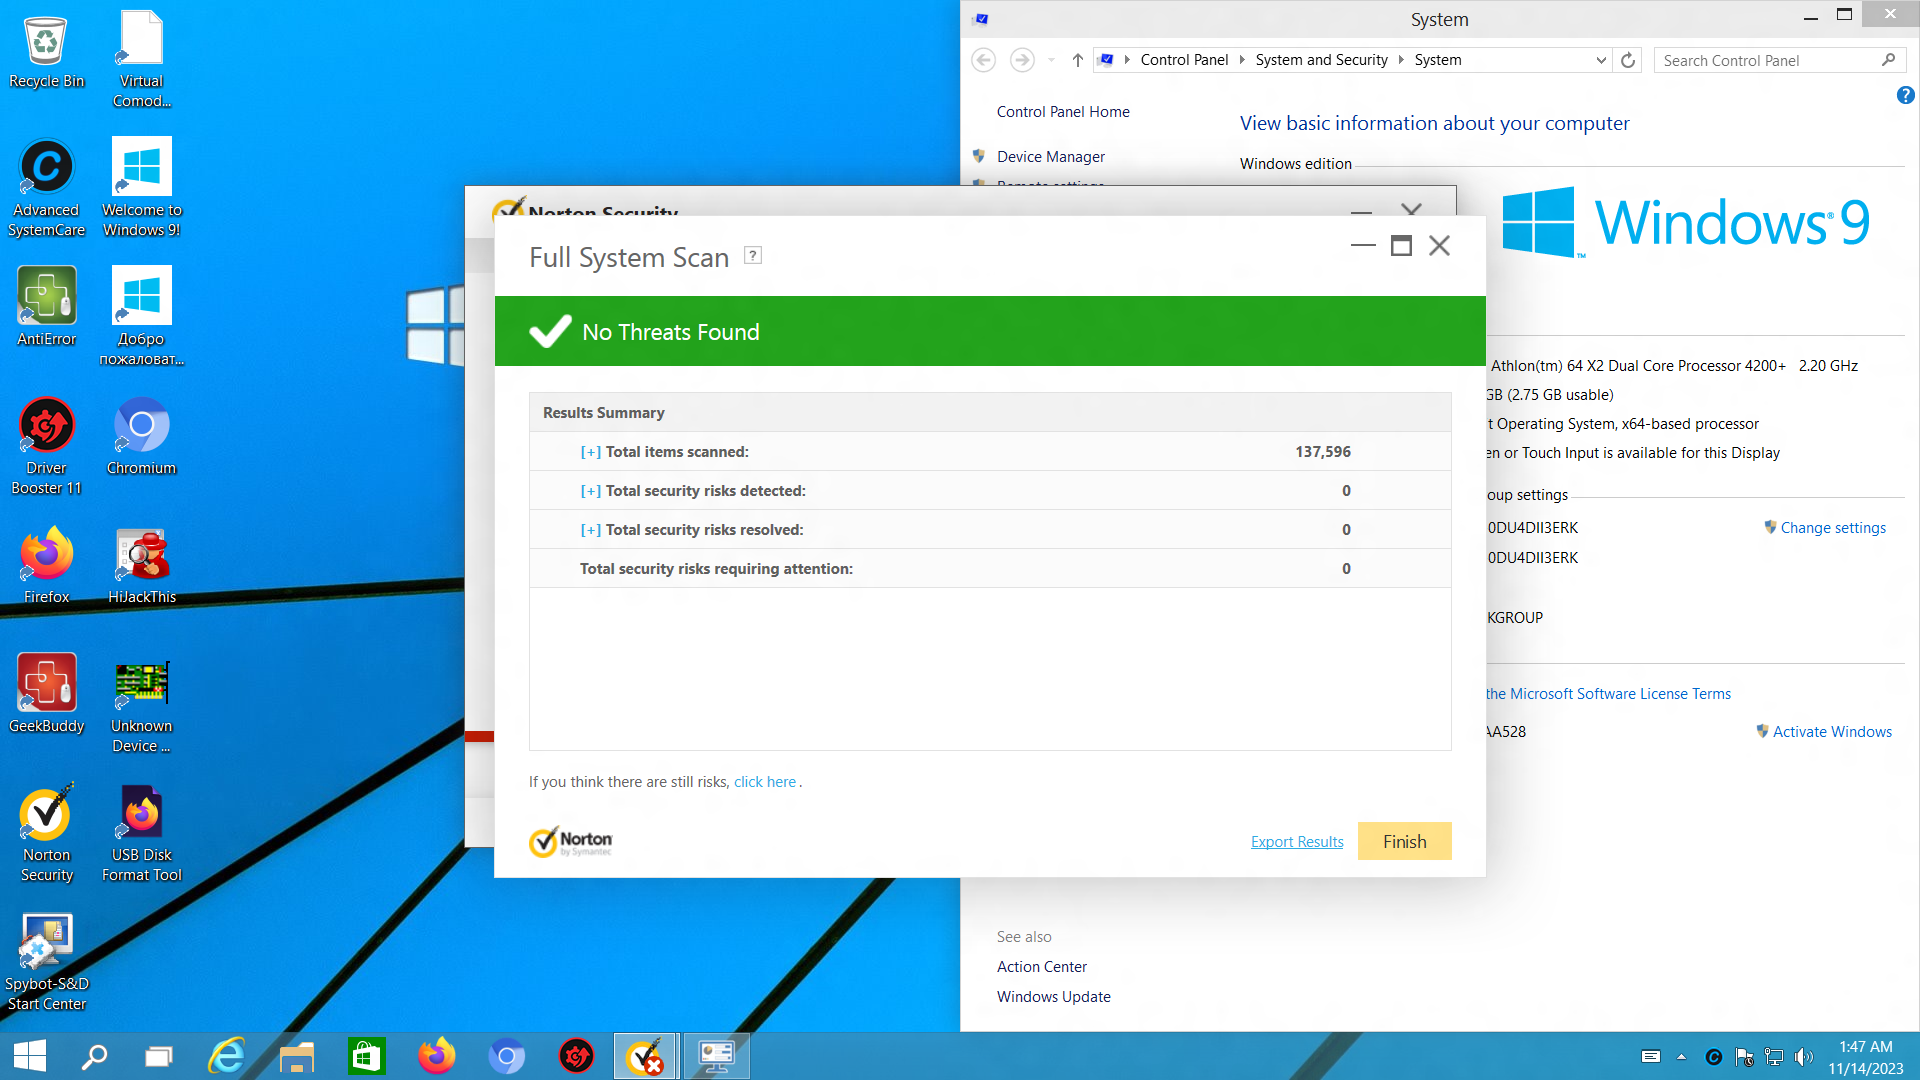 Full Virus Scan on our Windows 9 Install Using Norton Internet Security 2015